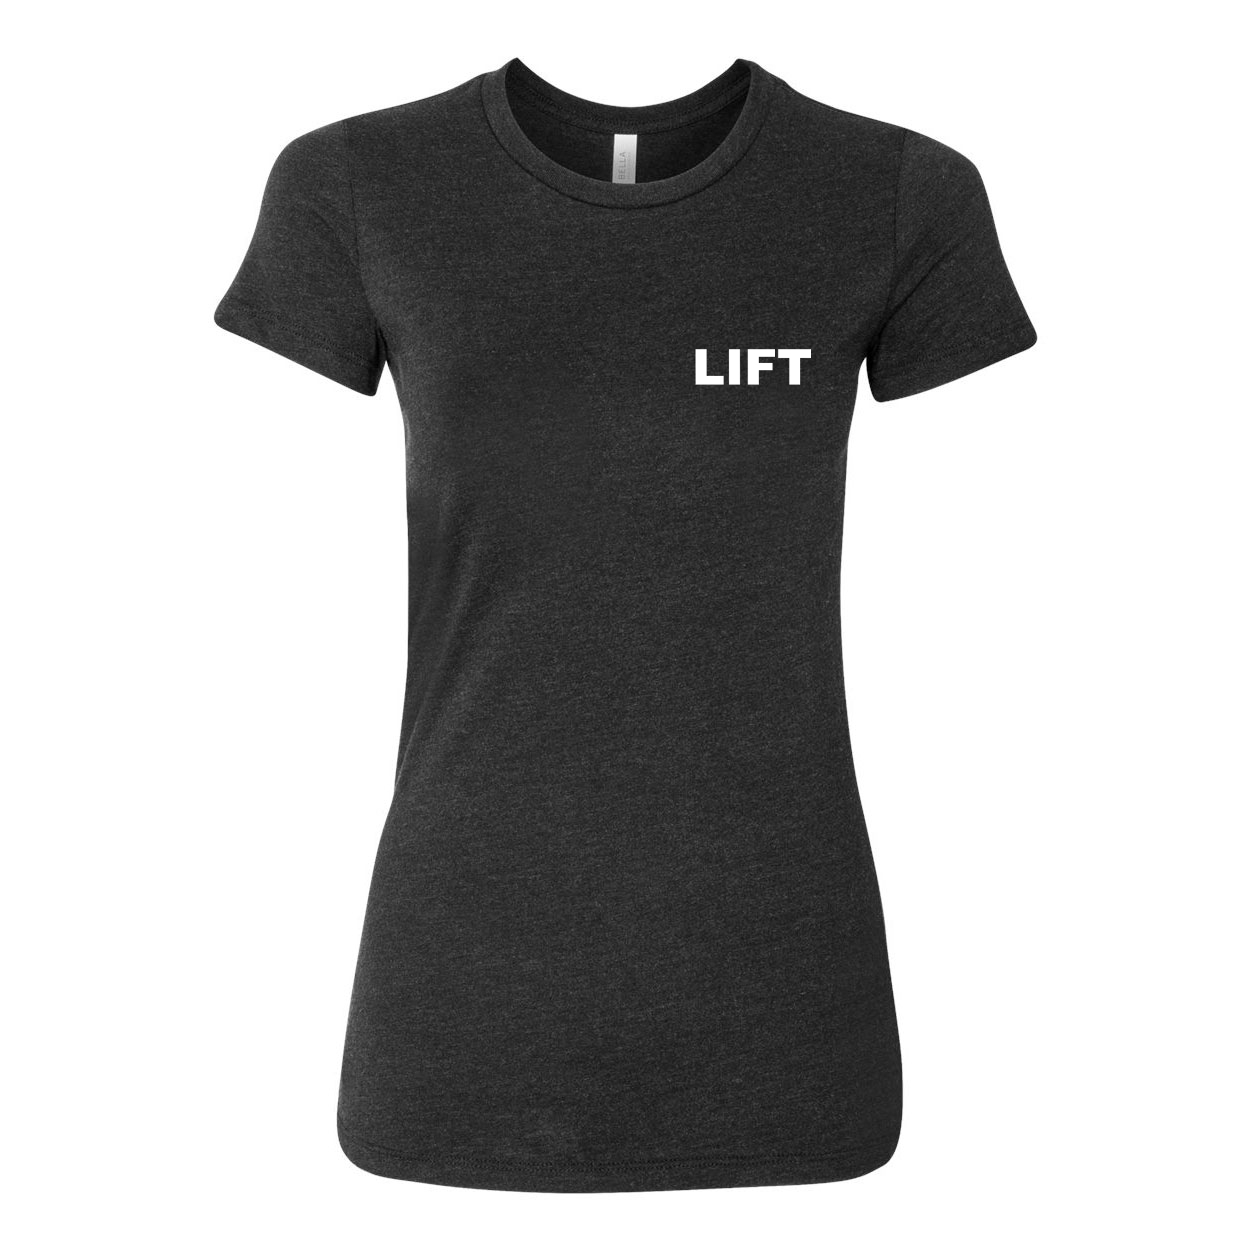 Lift Brand Logo Night Out Womens Fitted T-Shirt Dark Heather Gray